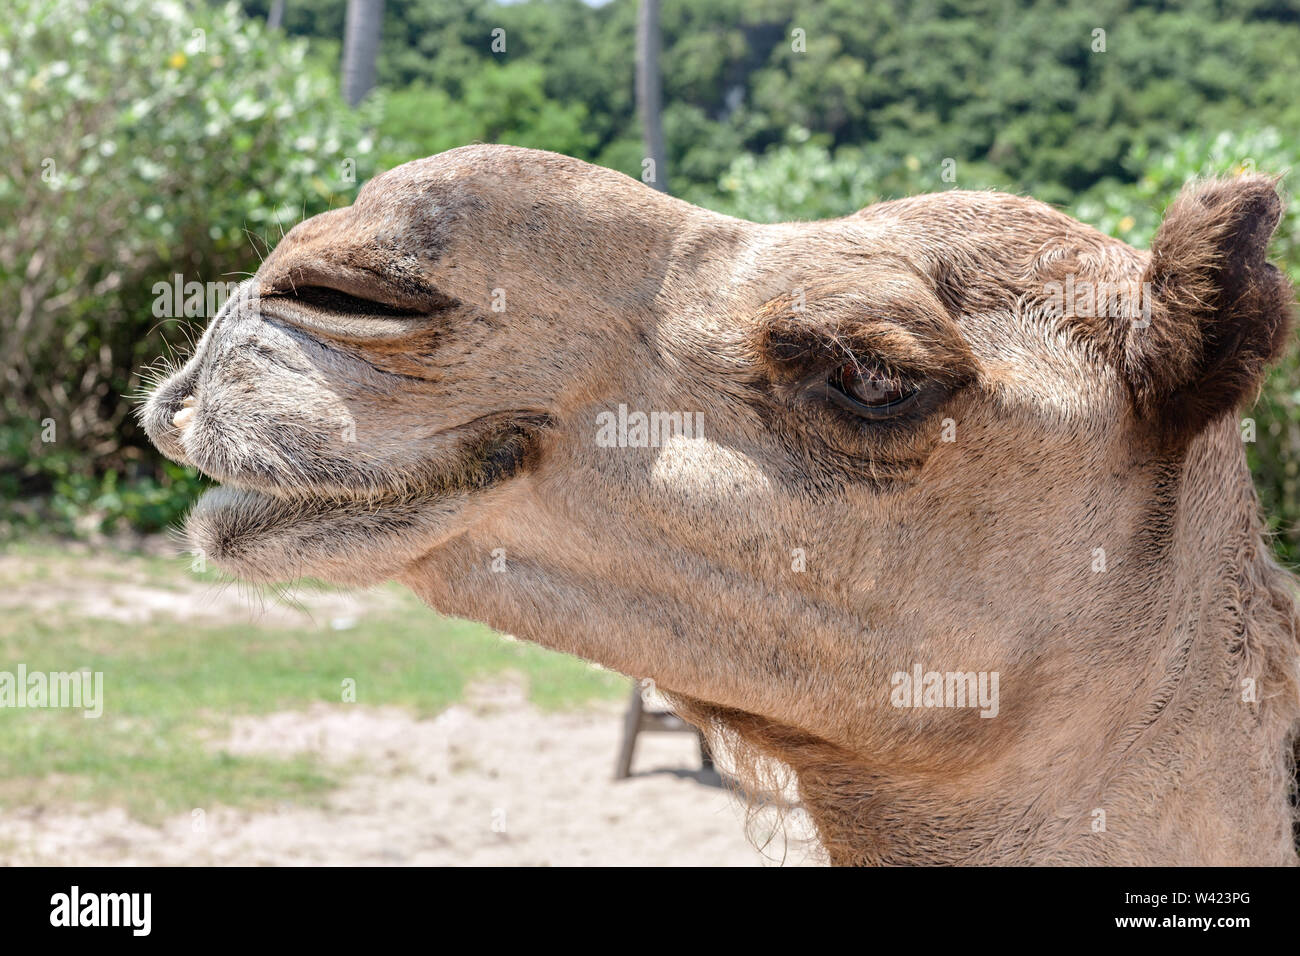 Laughing camel face side closeup at the beach side Stock Photo